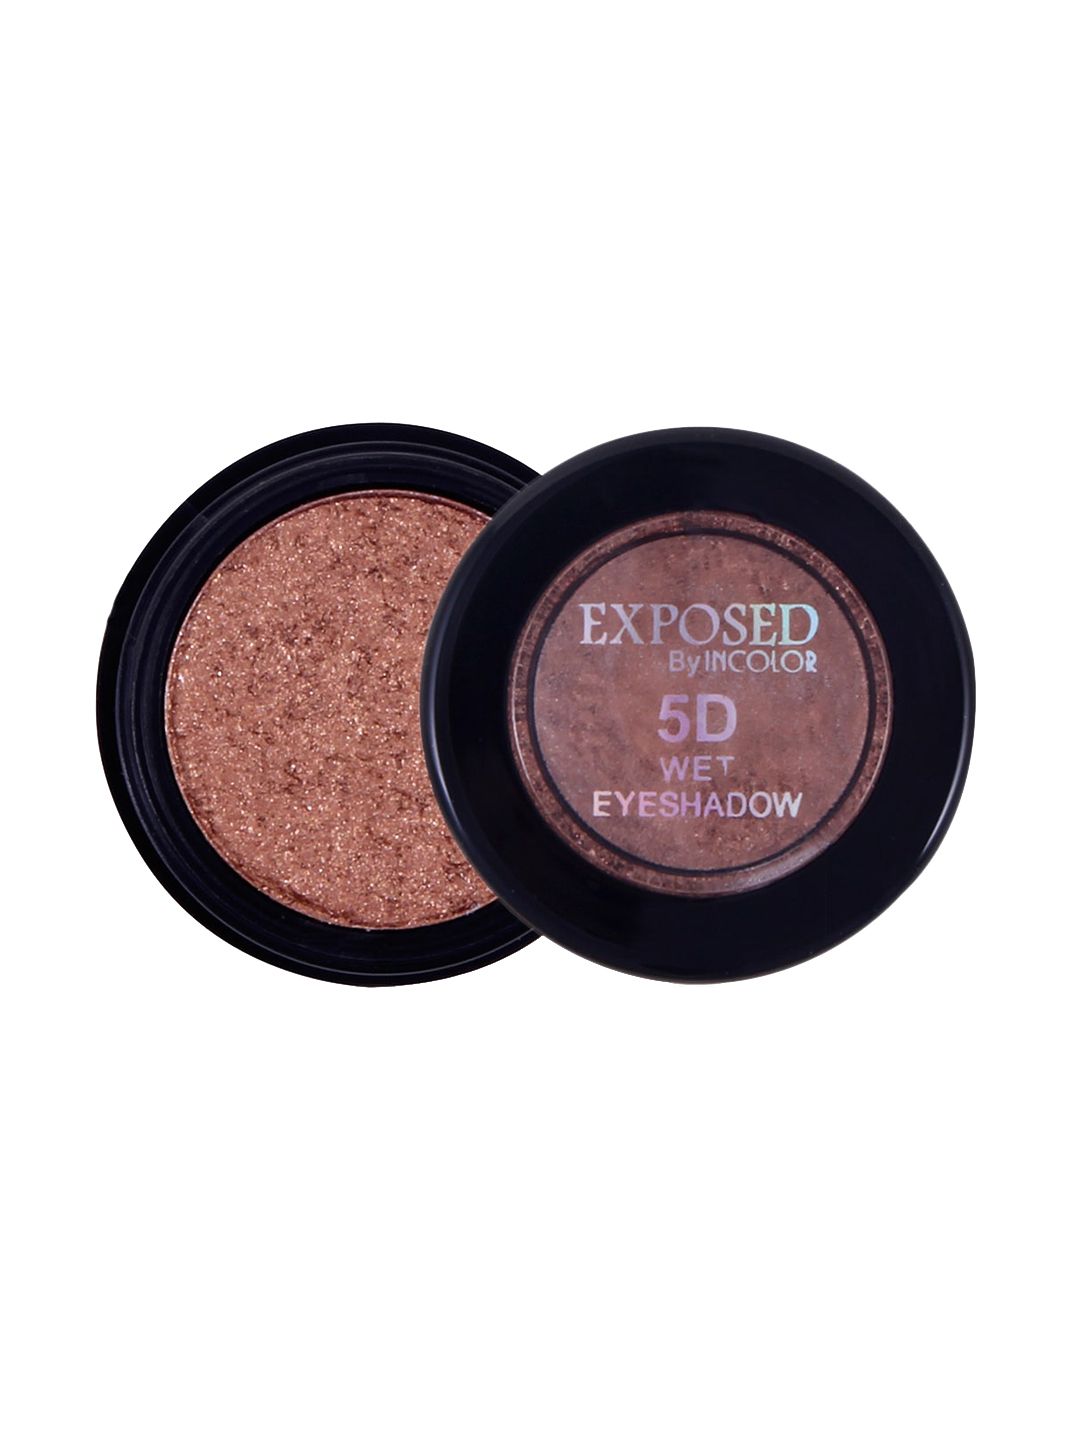 INCOLOR 5D Wet 03 Pressed Powder Eyeshadow 4.5 g Price in India